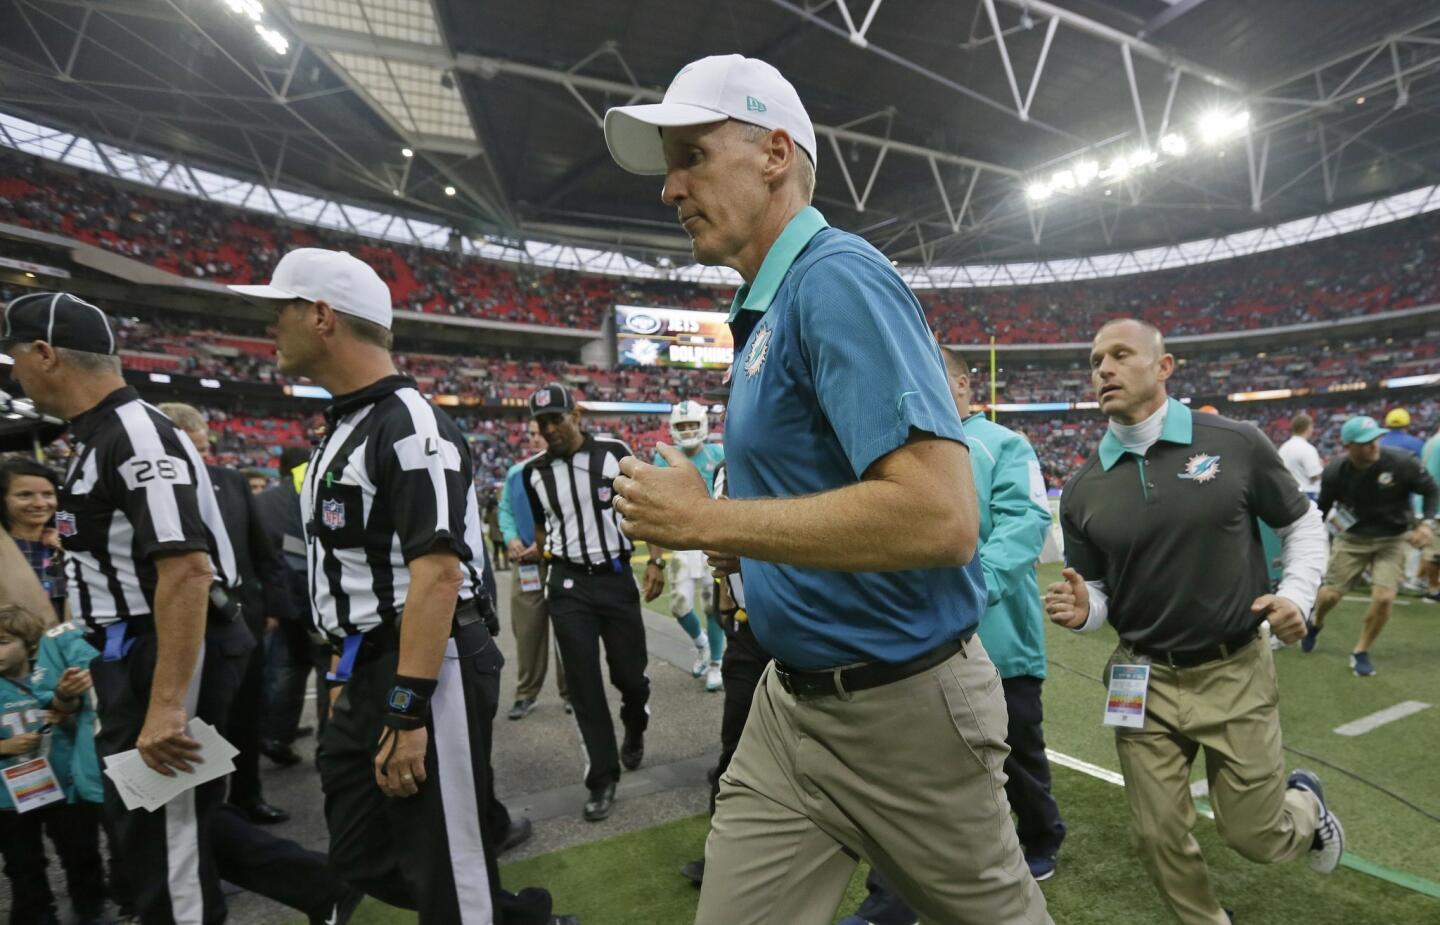 All sorts of speculation about Dolphins coach Joe Philbin's future followed Miami's lethargic 27-14 loss to the New York Jets in London. Miami has lost three games in a row to drop to 1-3. When asked whether he's worried about his job security, Philbin said: “Not at all.” Perhaps he should be.